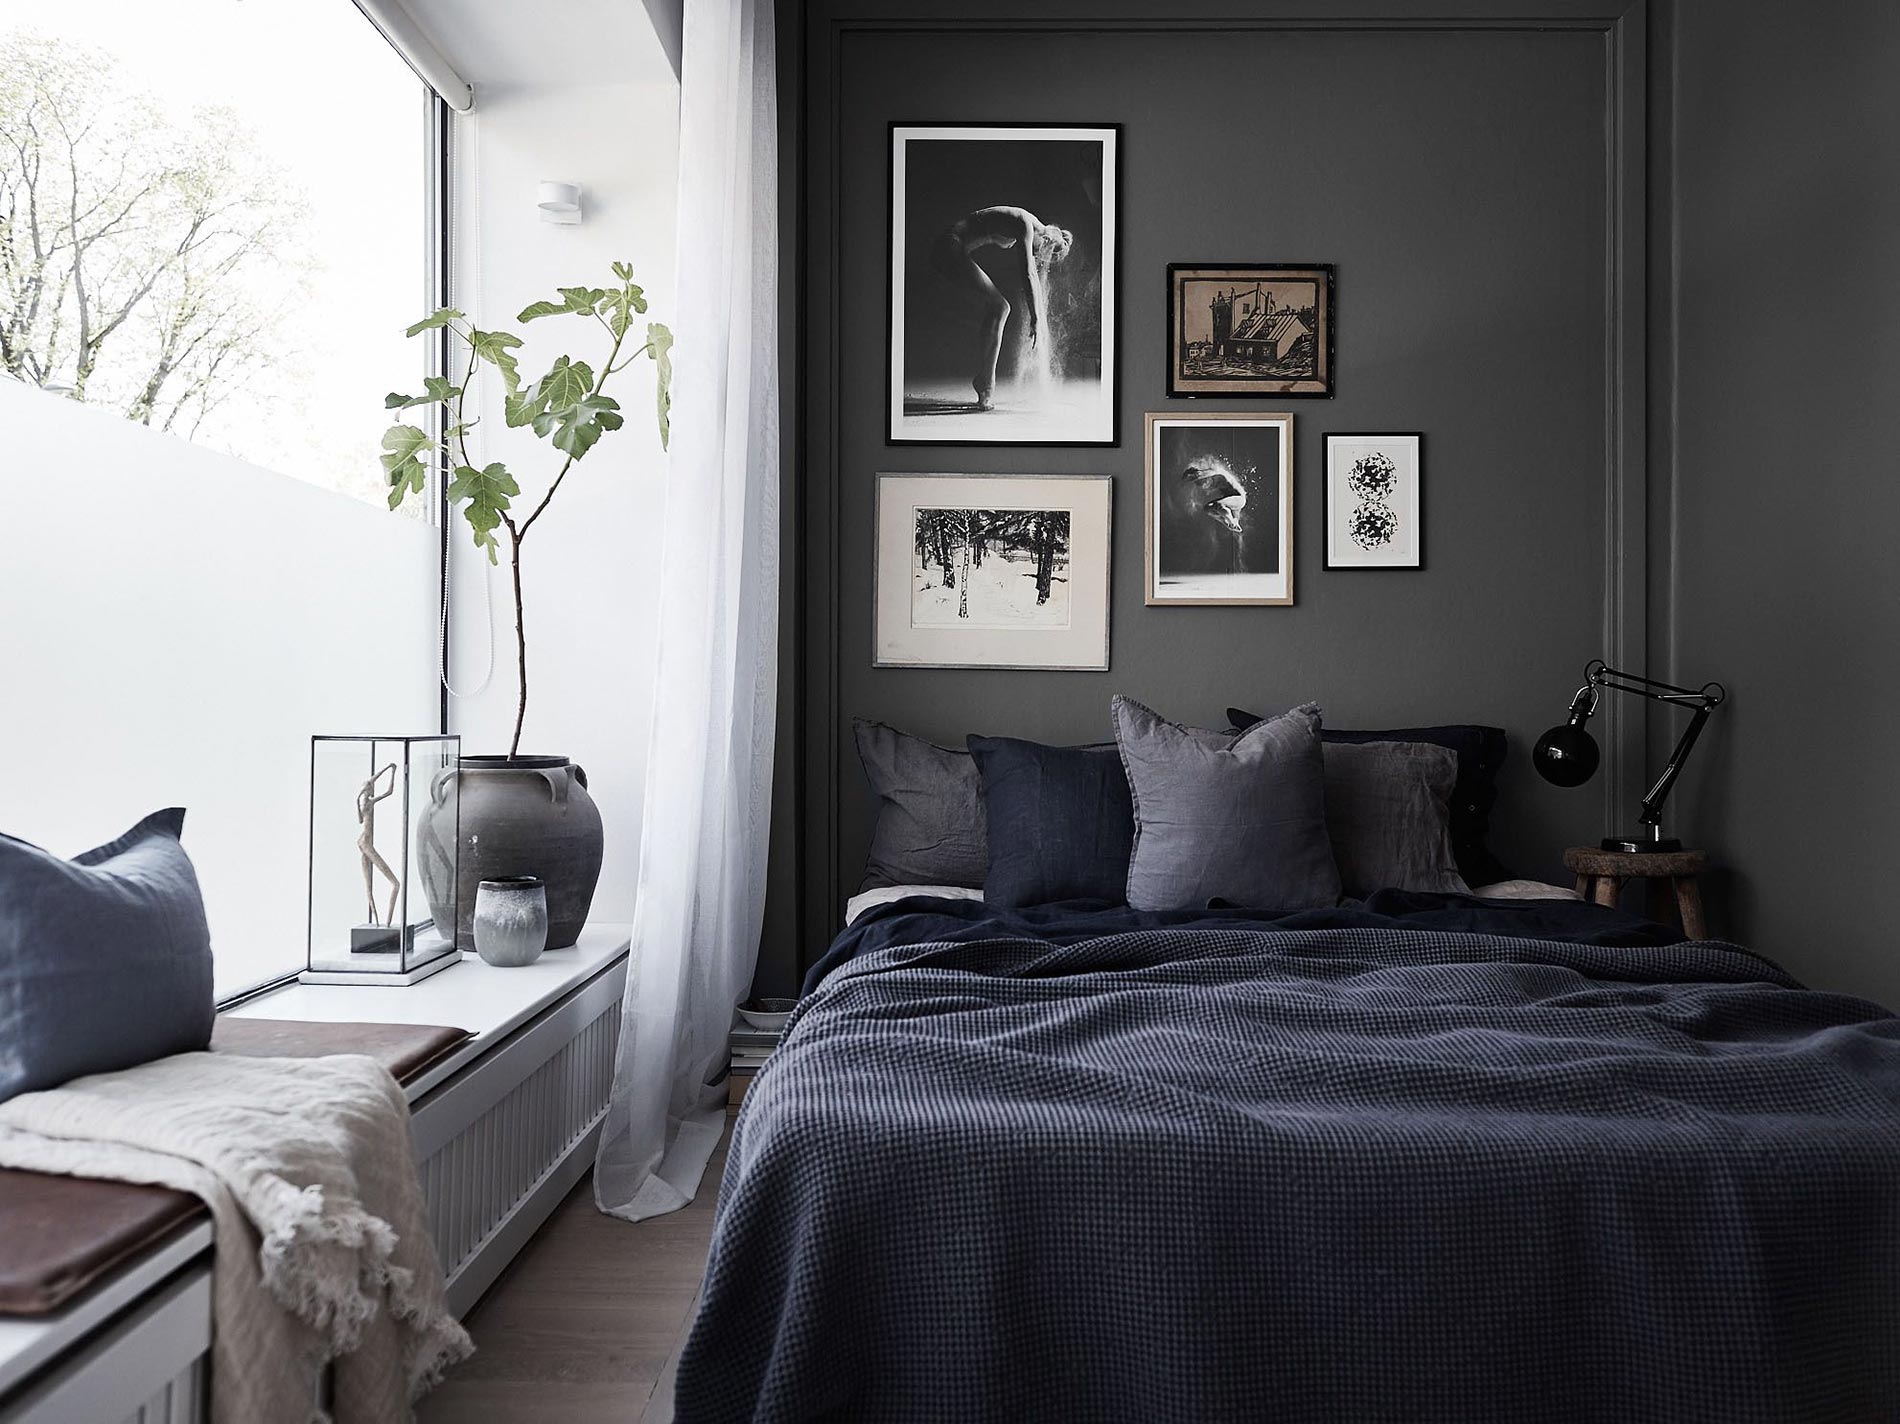 bed wall inspirations